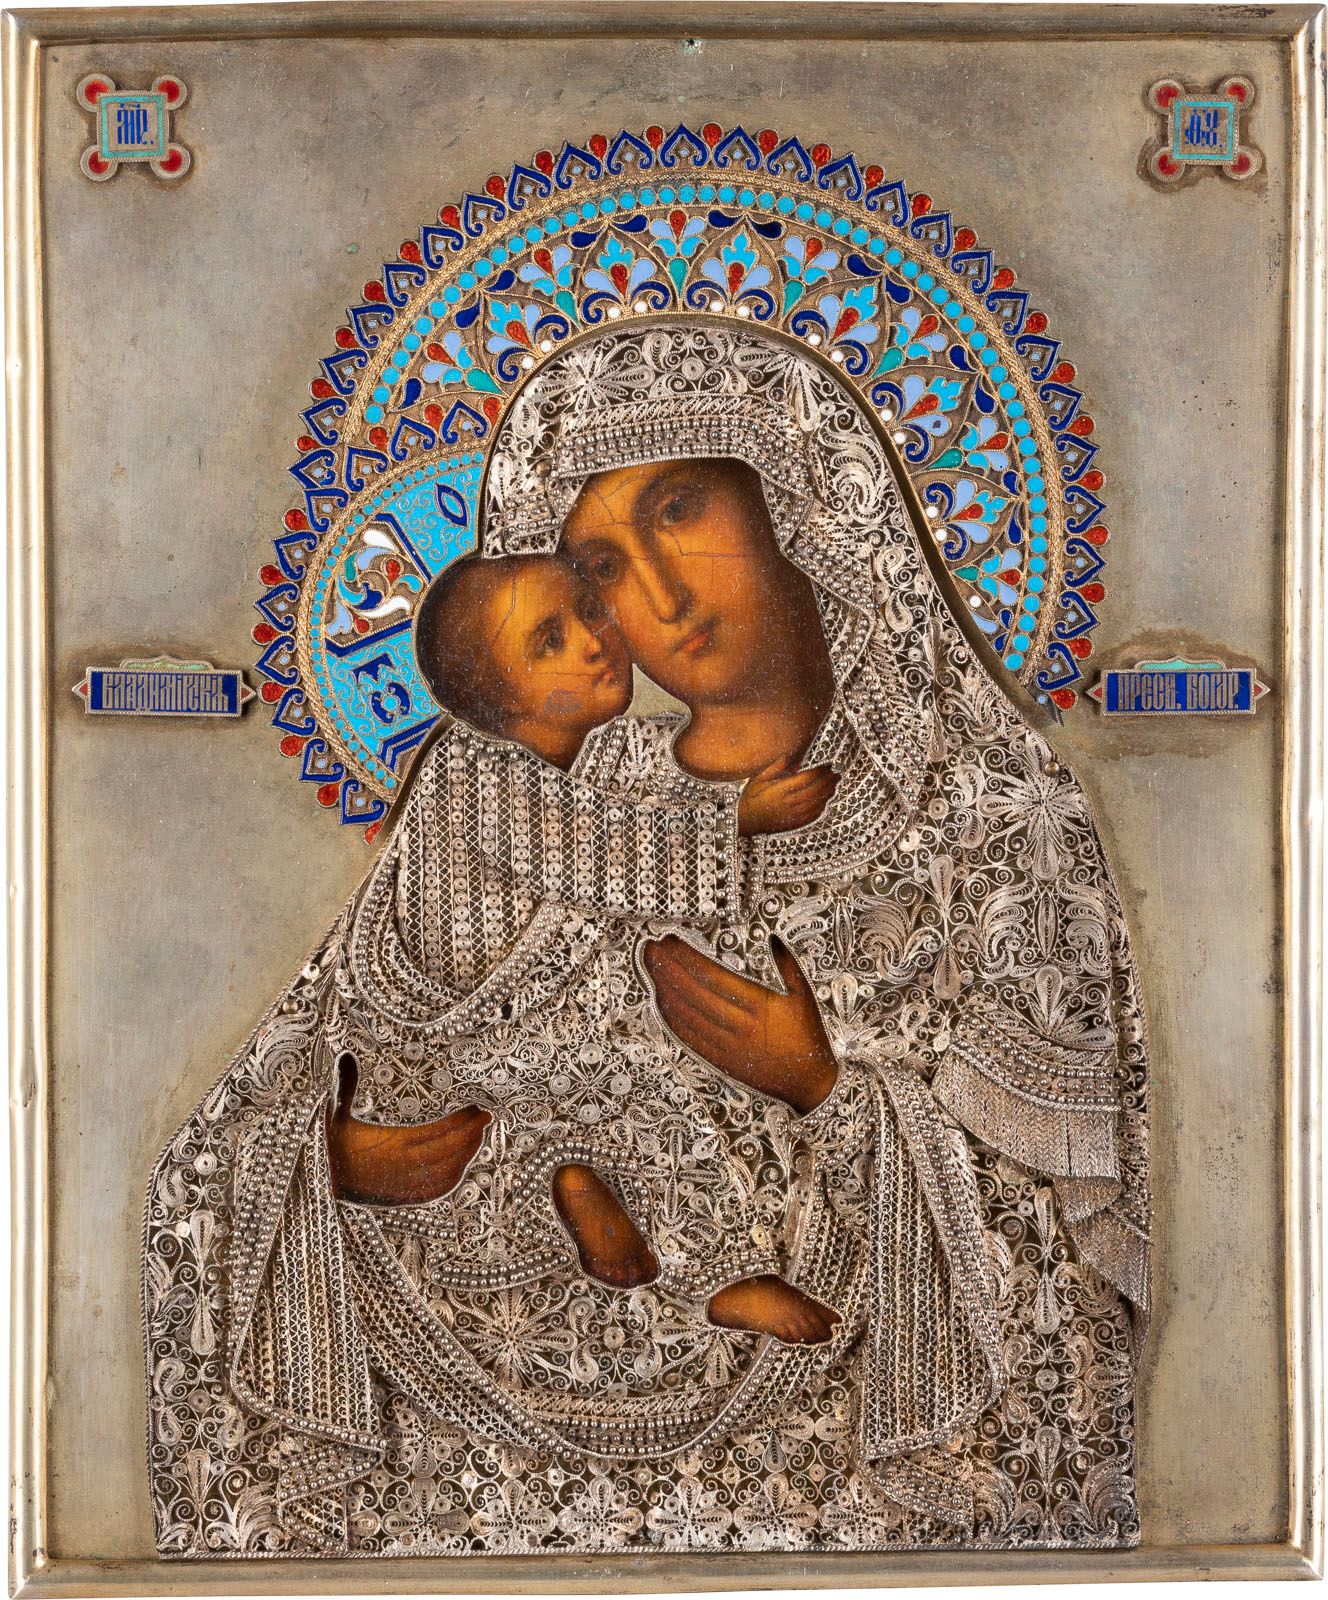 AN ICON SHOWING THE VLADIMIRSKAYA MOTHER OF GOD WITH A S ICONO DE LA MADRE DE DI&hellip;